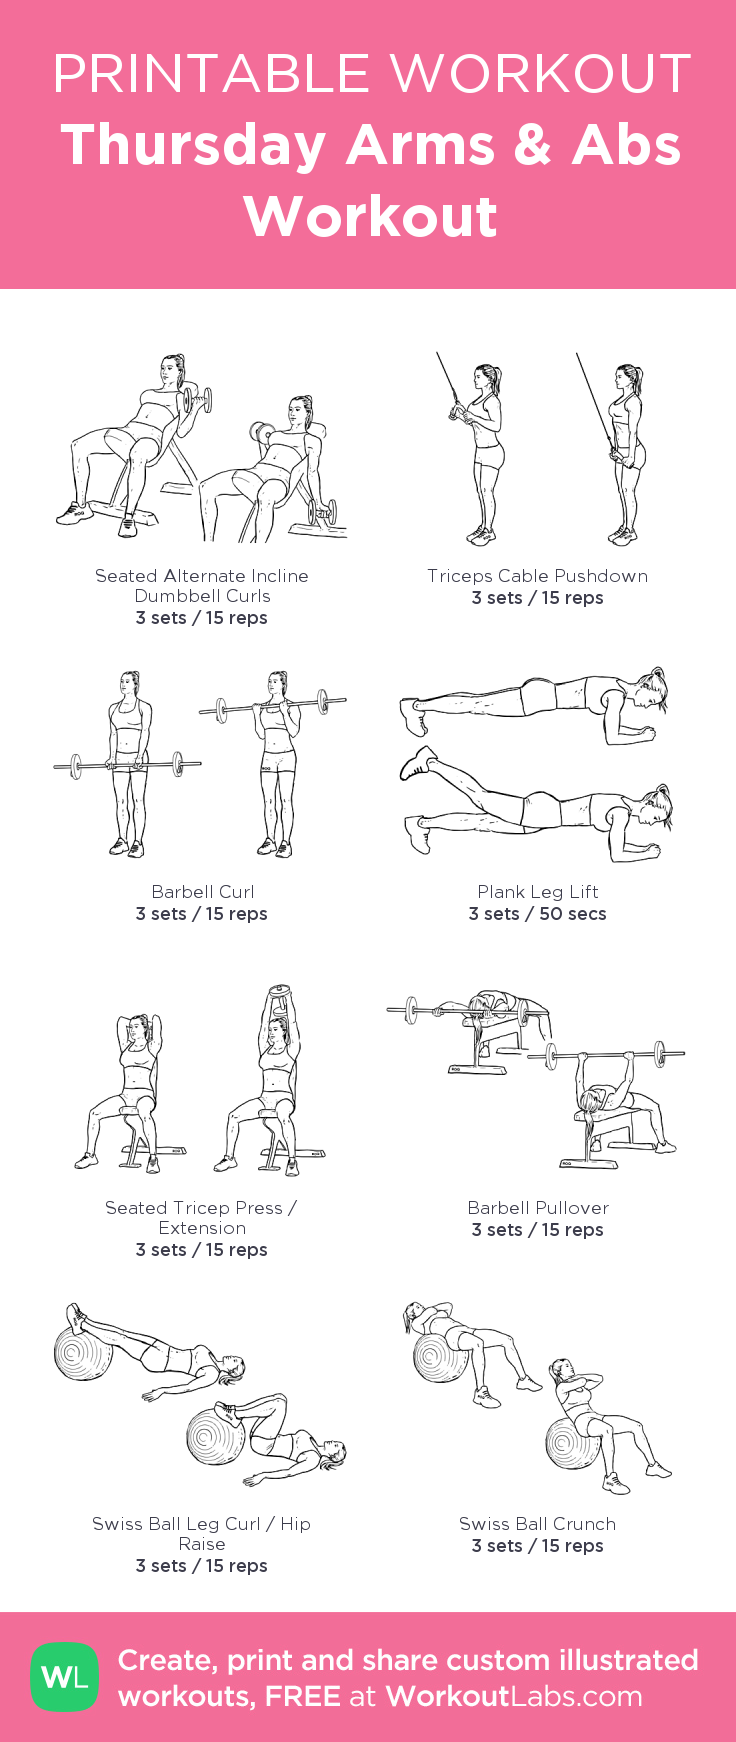 Thursday Arms Abs Workout: my custom printable workout by 